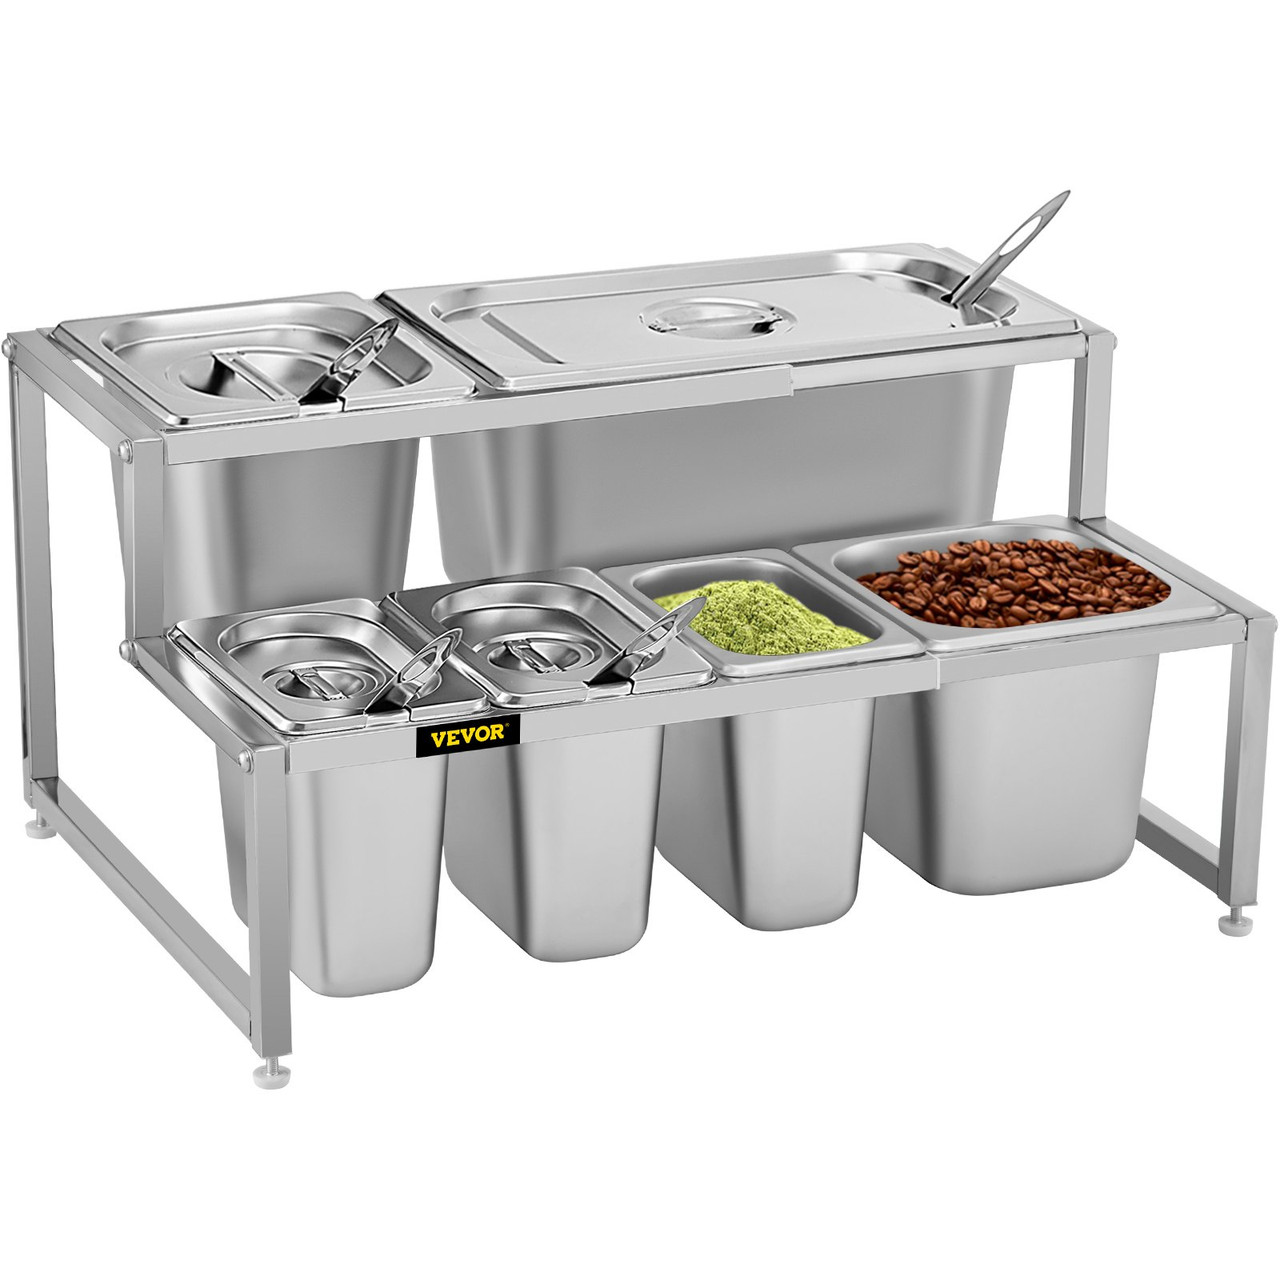 Expandable Spice Rack, 13.8"-23.6" Adjustable, 2-Tier Stainless Steel Organizer Shelf with 3 1/9 Pans 2 1/6 Pans 1 1/3 Pan 6 Ladles, Countertop Inclined Holder for Sauce Ingredients Fruits